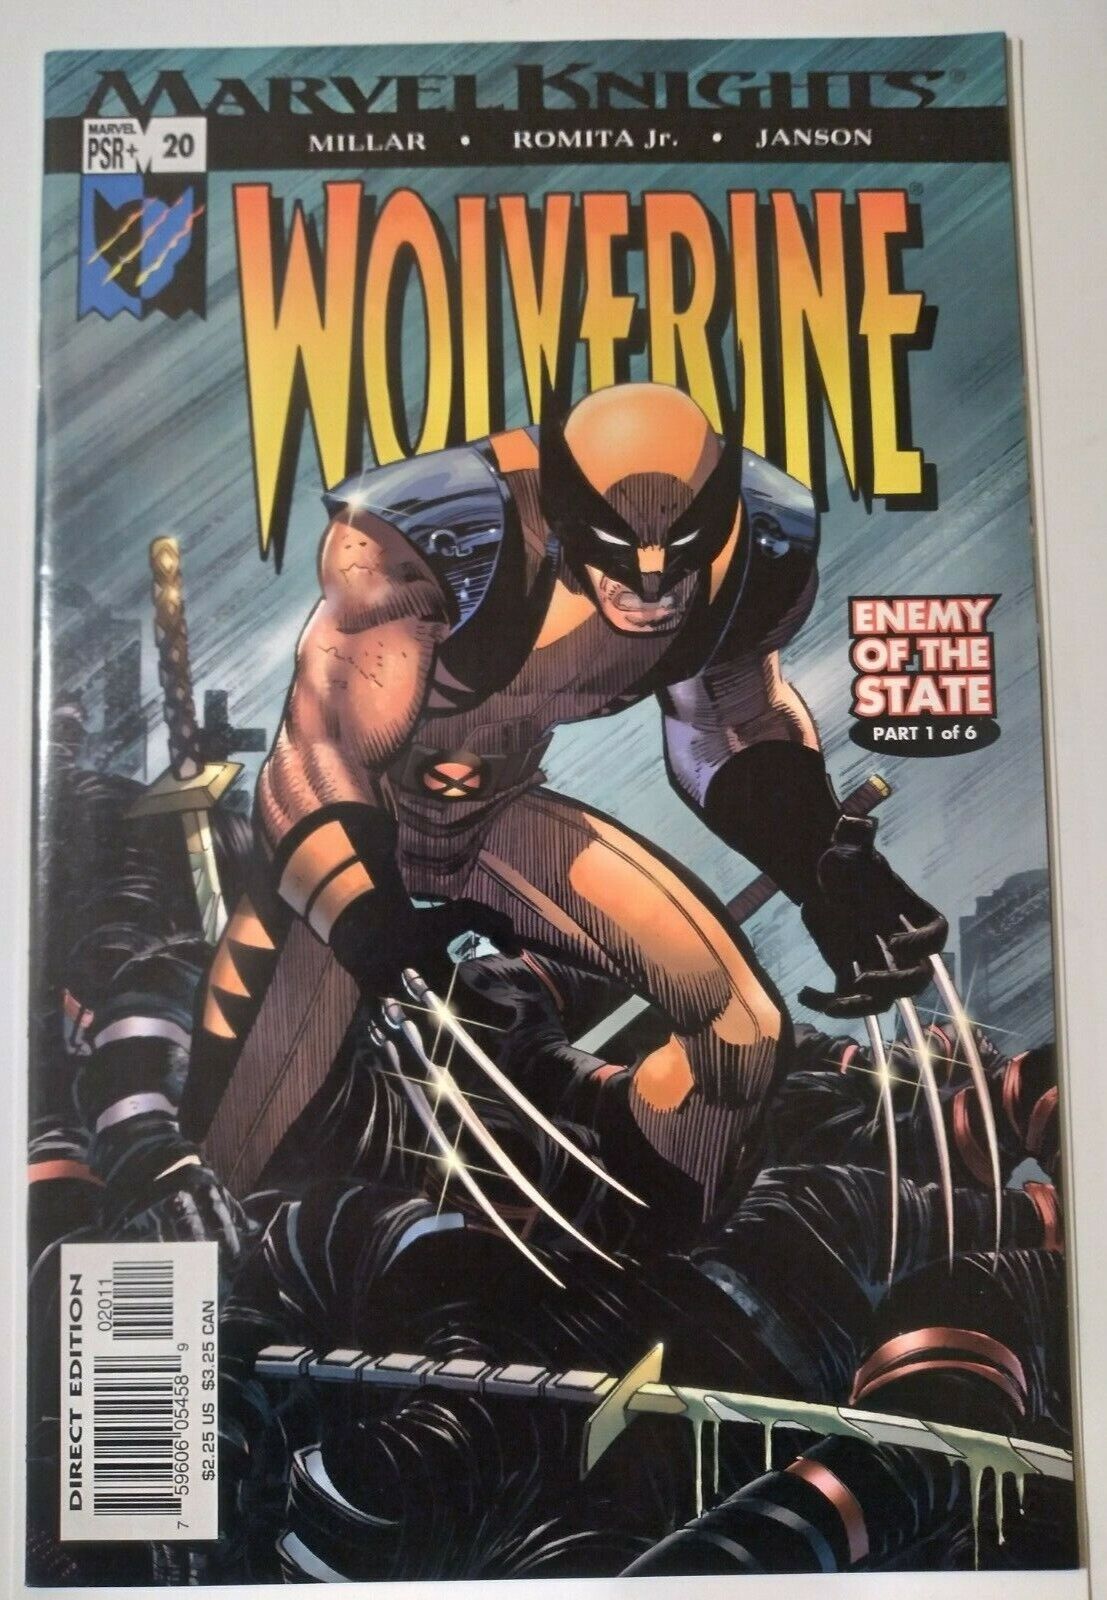 Wolverine Enemy of the State #20 Marvel Knights Comics 2004-